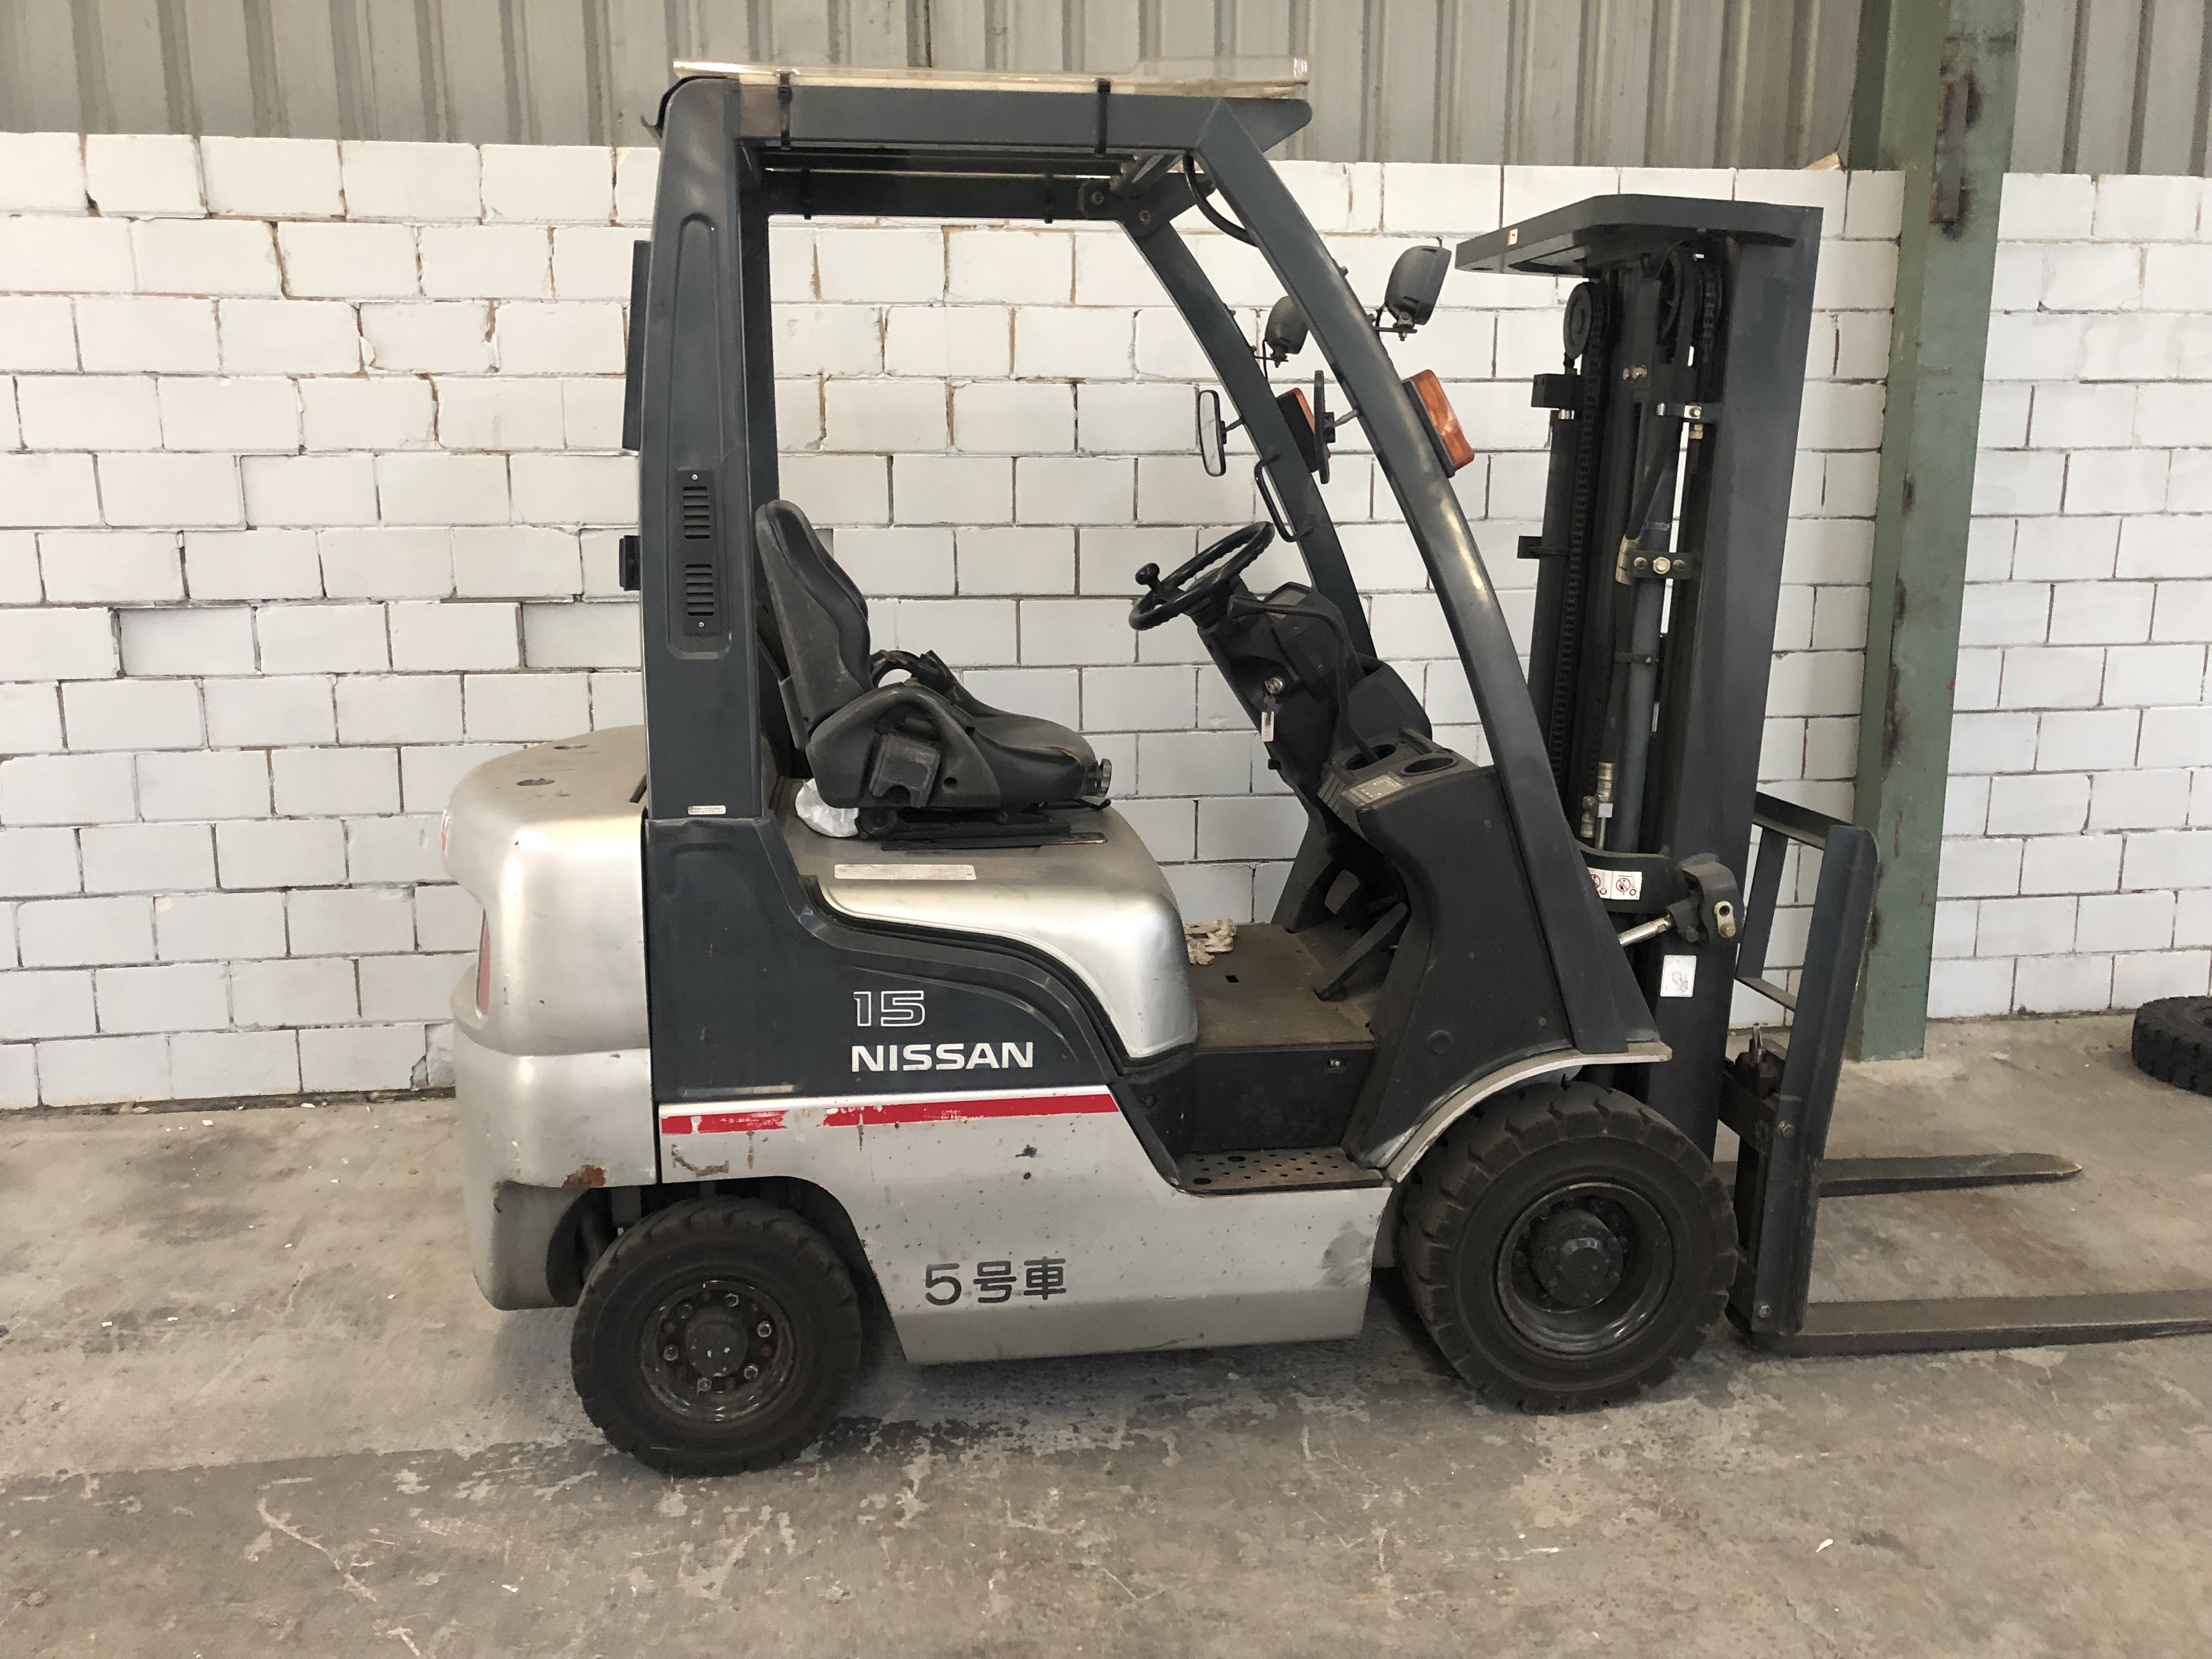 Nissan 1 5 Ton Container Mast Petrol Forklift Forklift Sales Hire Service In Melbourne